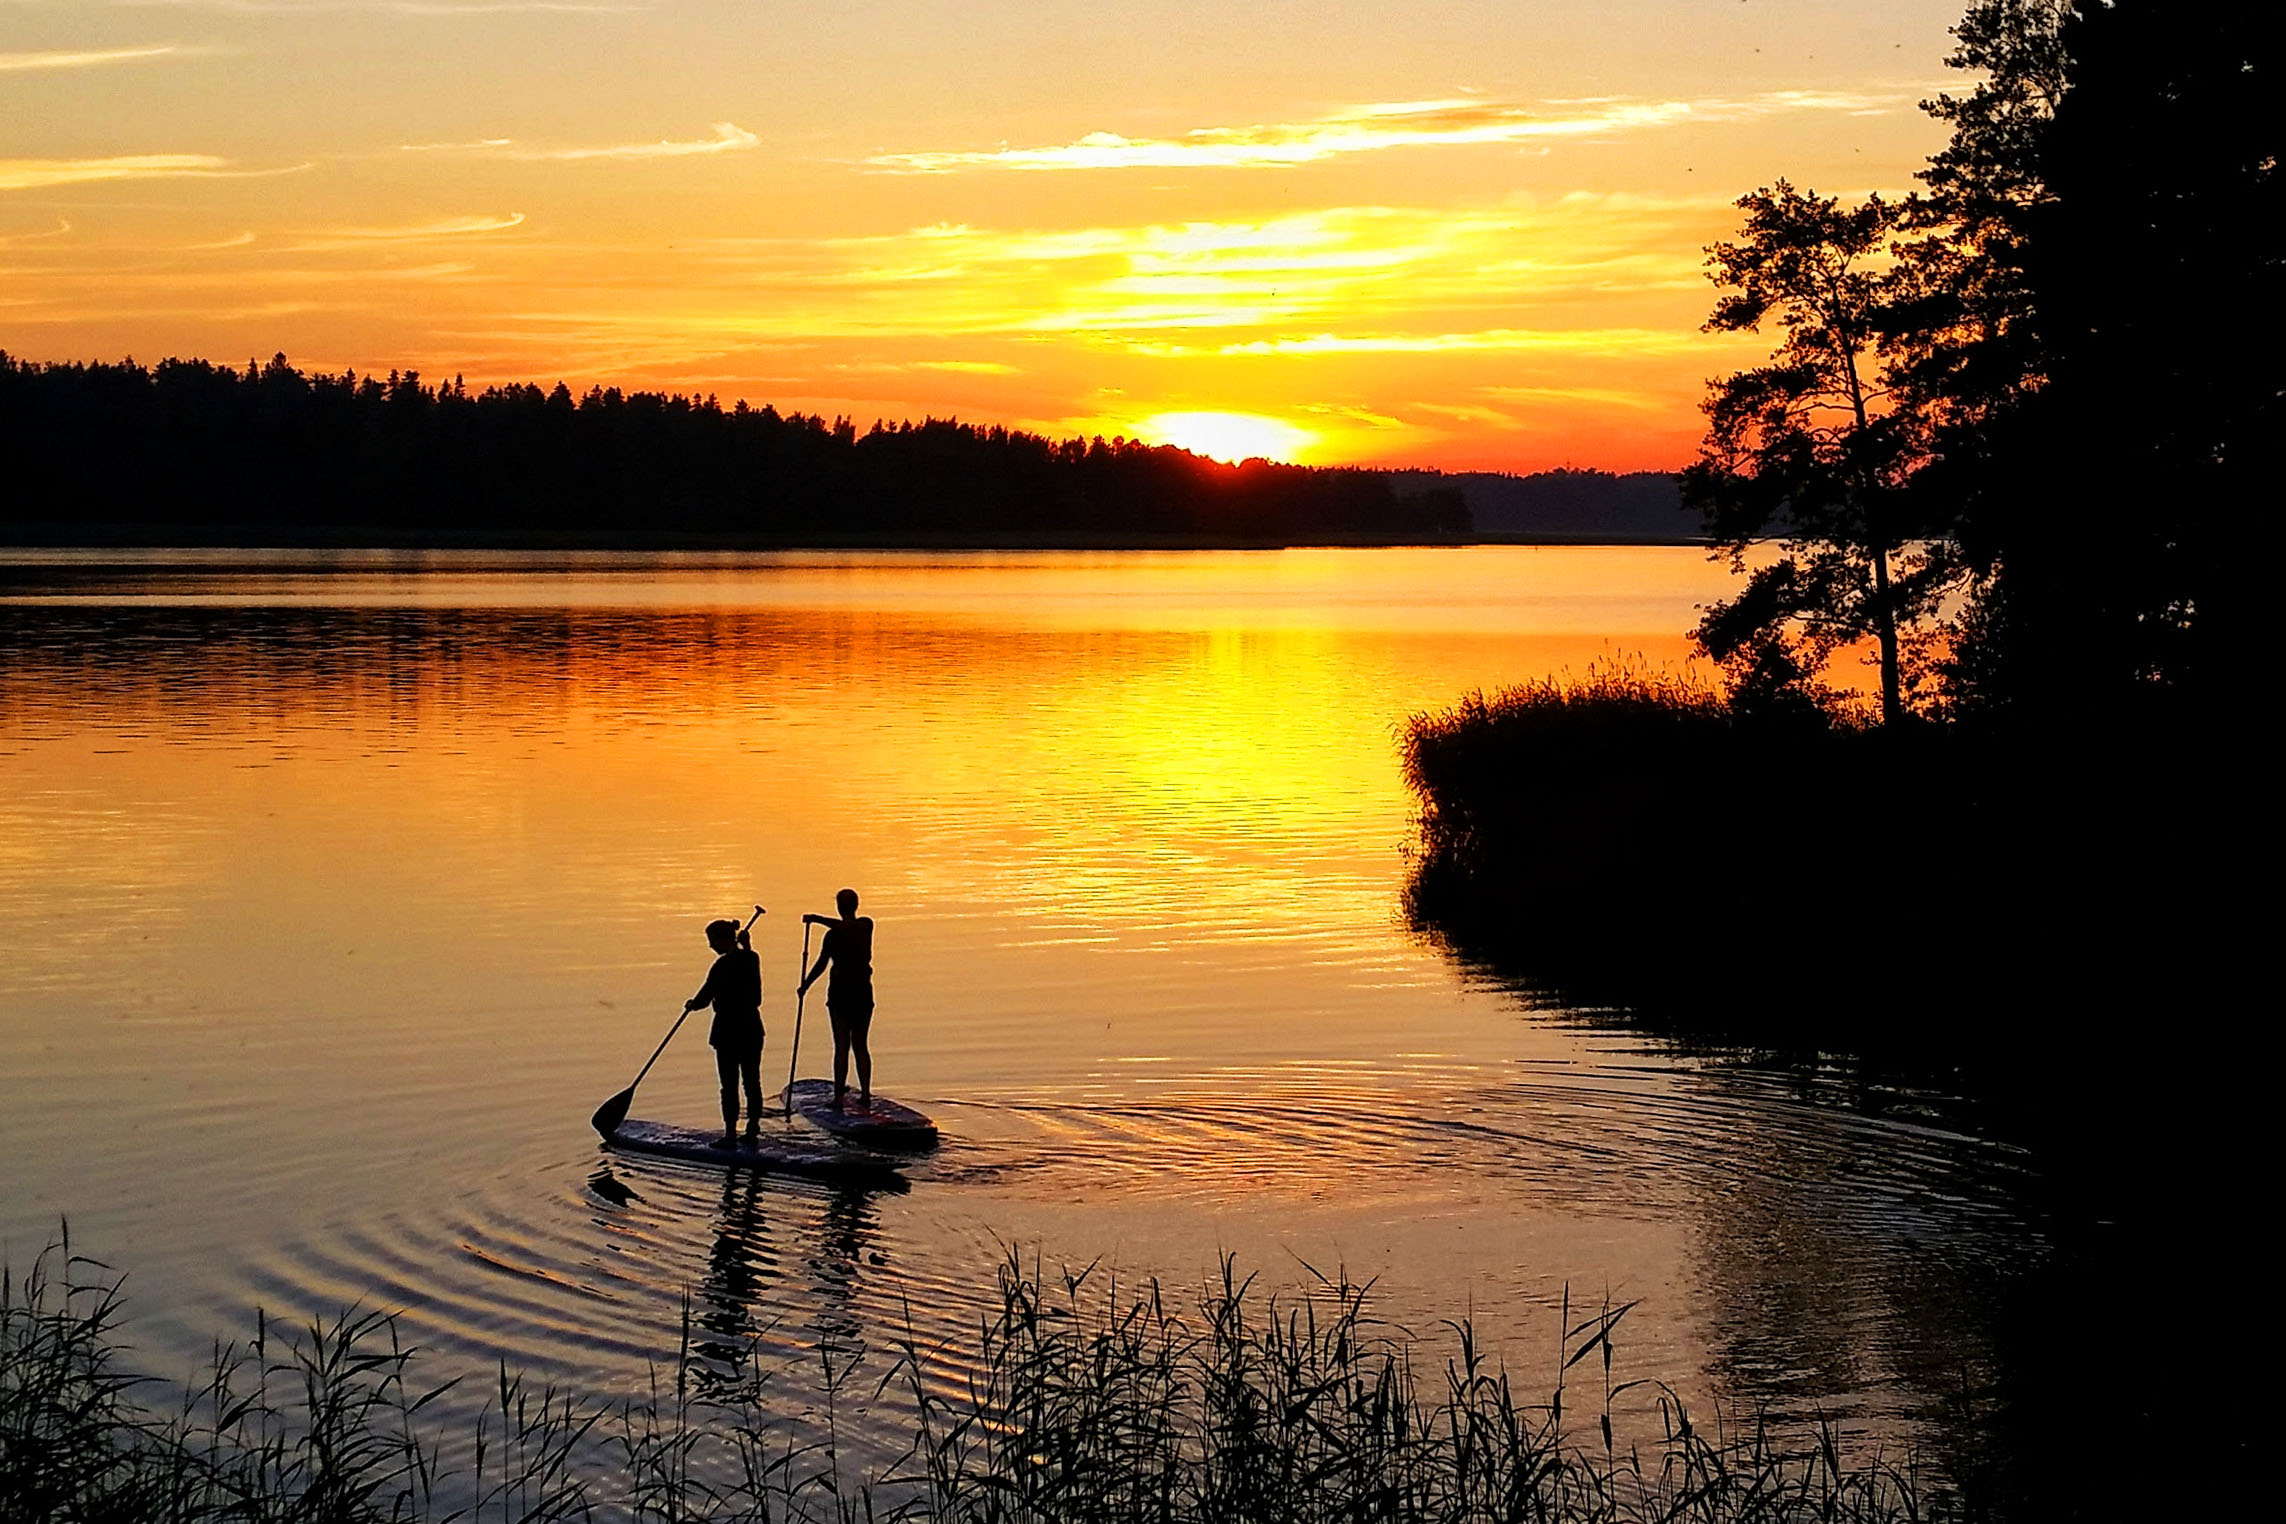 Living the Outdoor Life in Finland